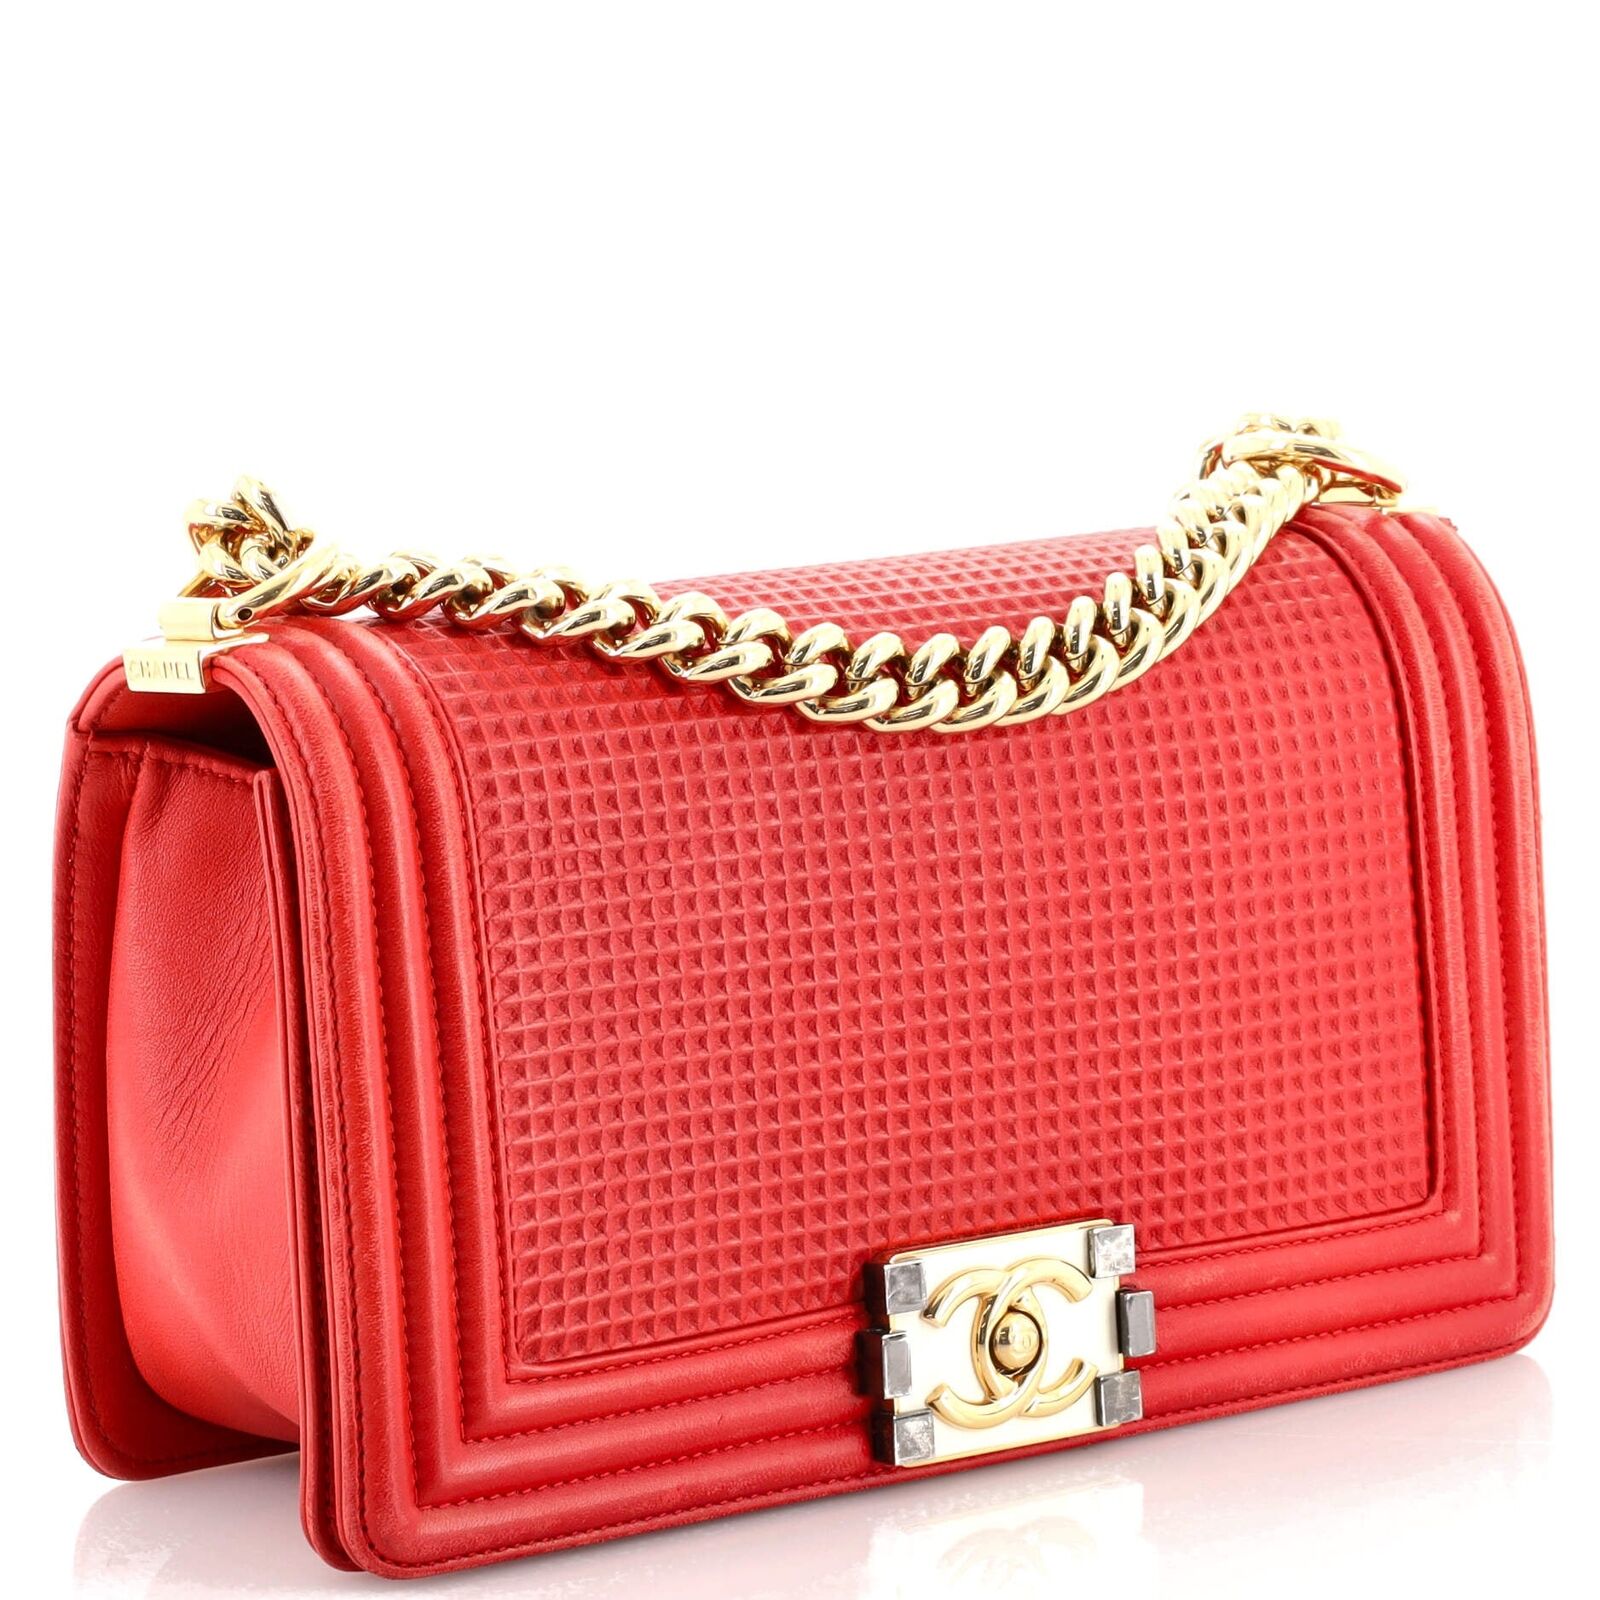 CHANEL FLAP BOY RED CUBE EMBOSSED LEATHER MEDIUM BAG